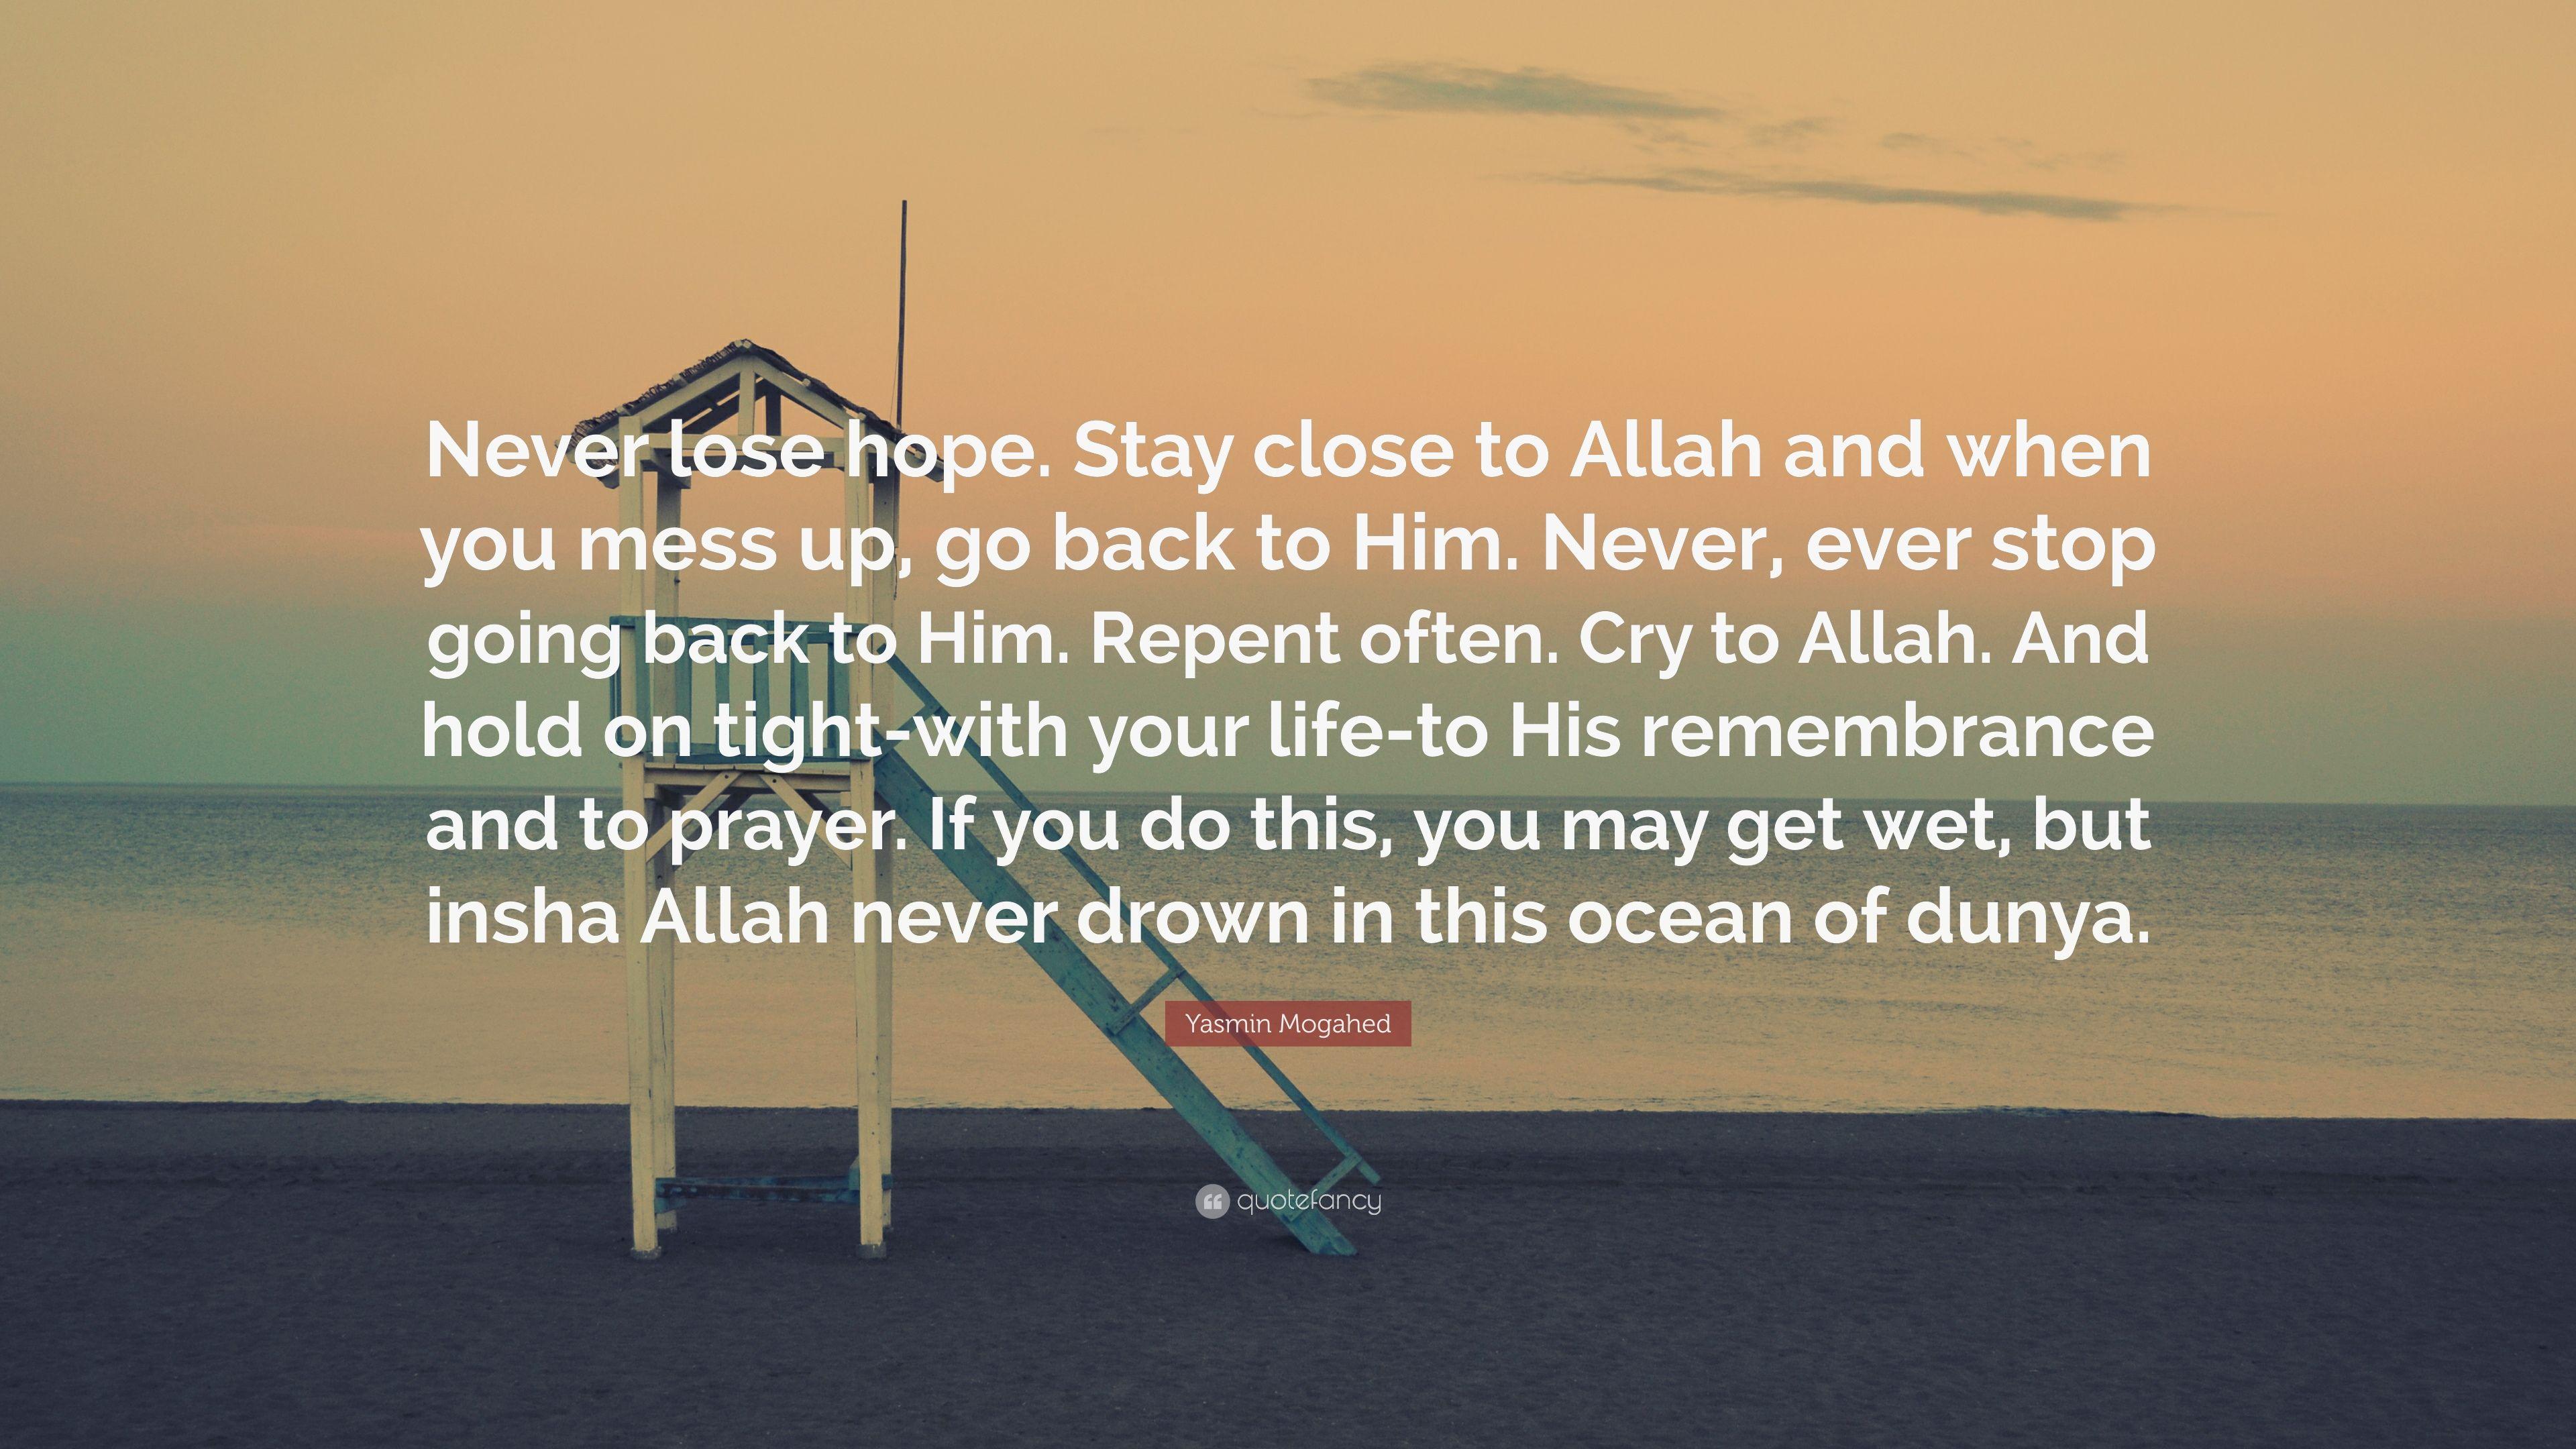 Yasmin Mogahed Quote: “Never lose hope. Stay close to Allah and when